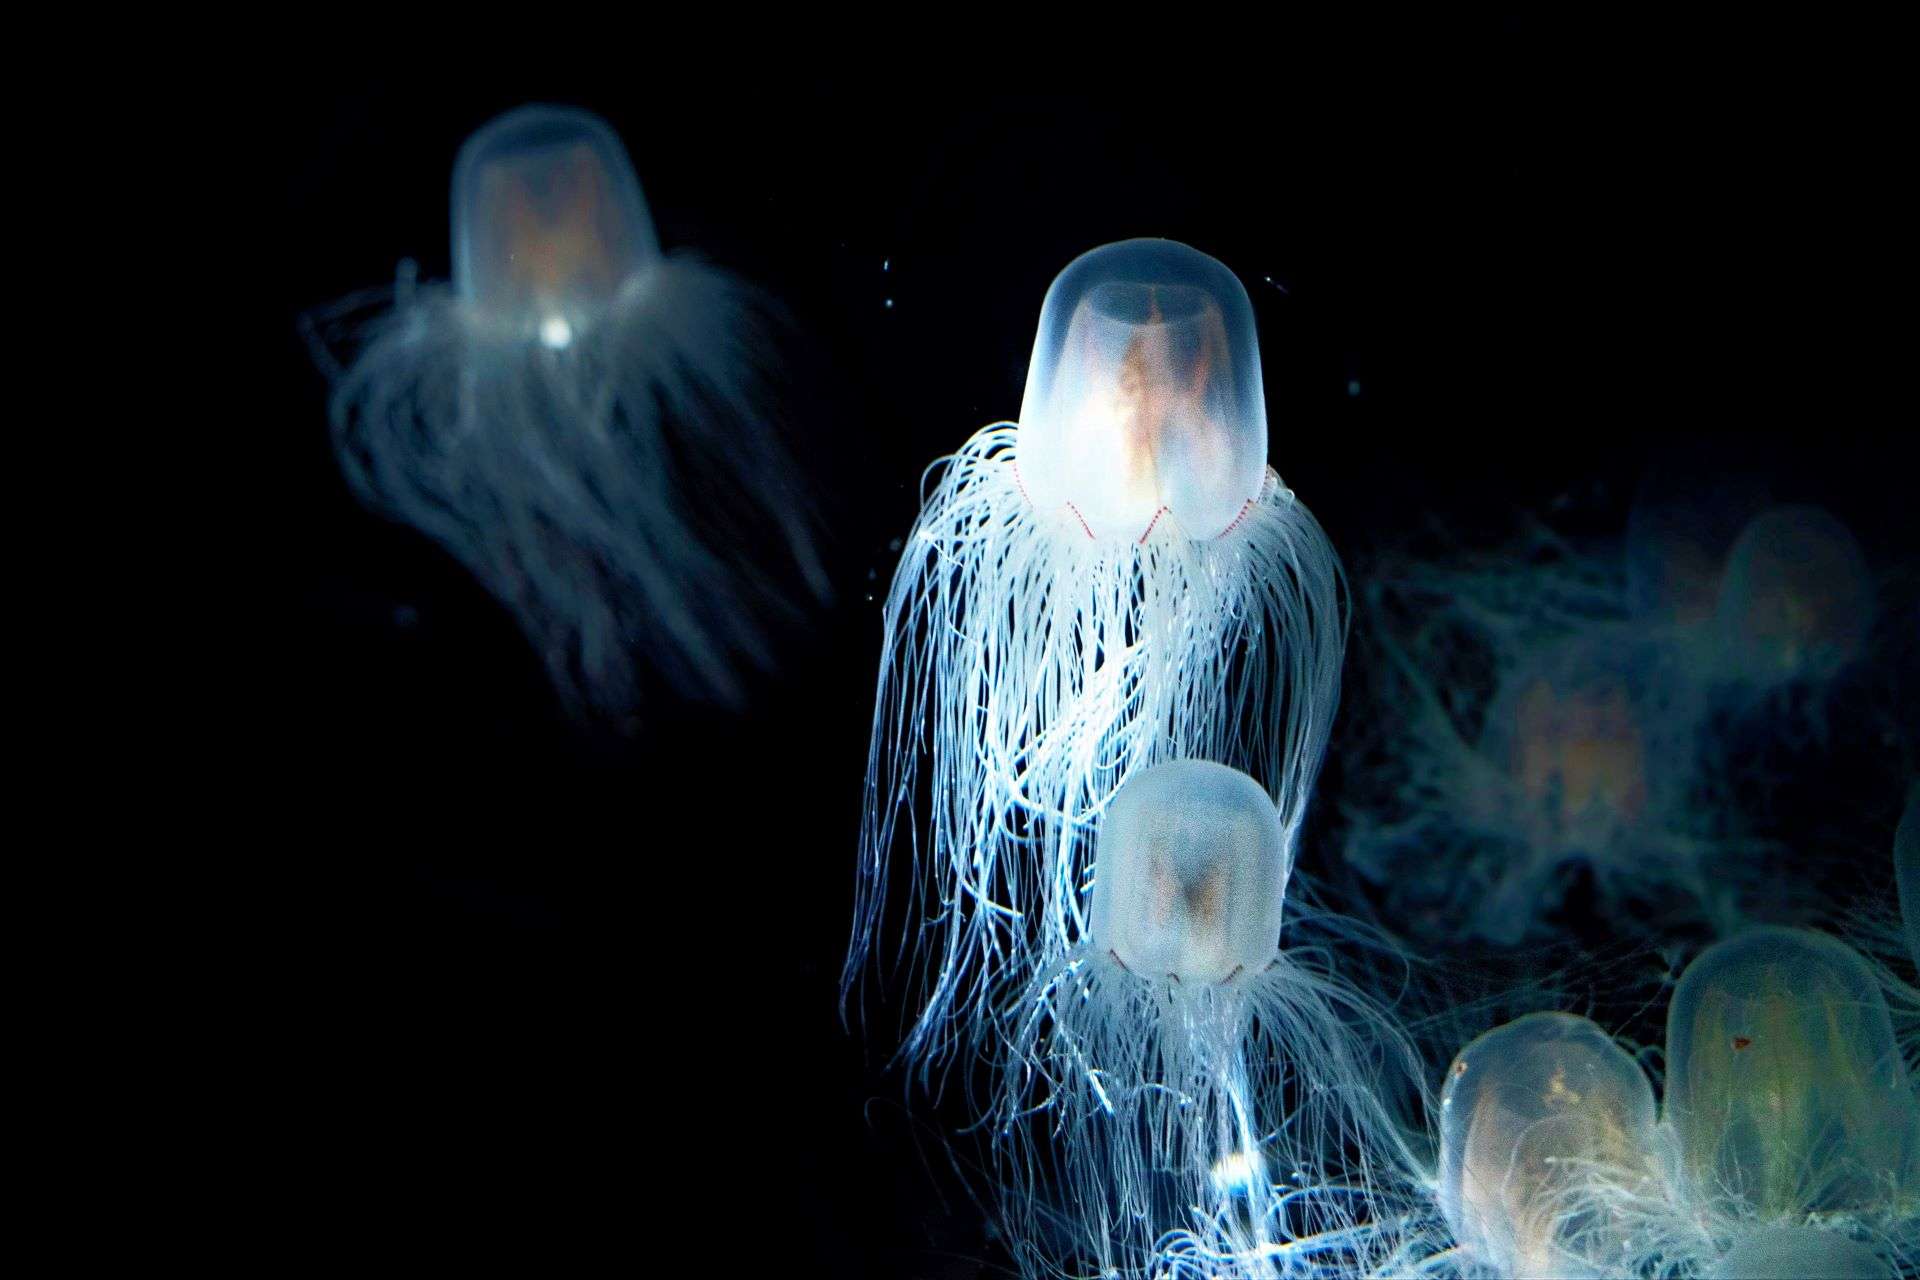 A photo of sea wasps in the sea glows as a means to scare off predators in the dark waters.